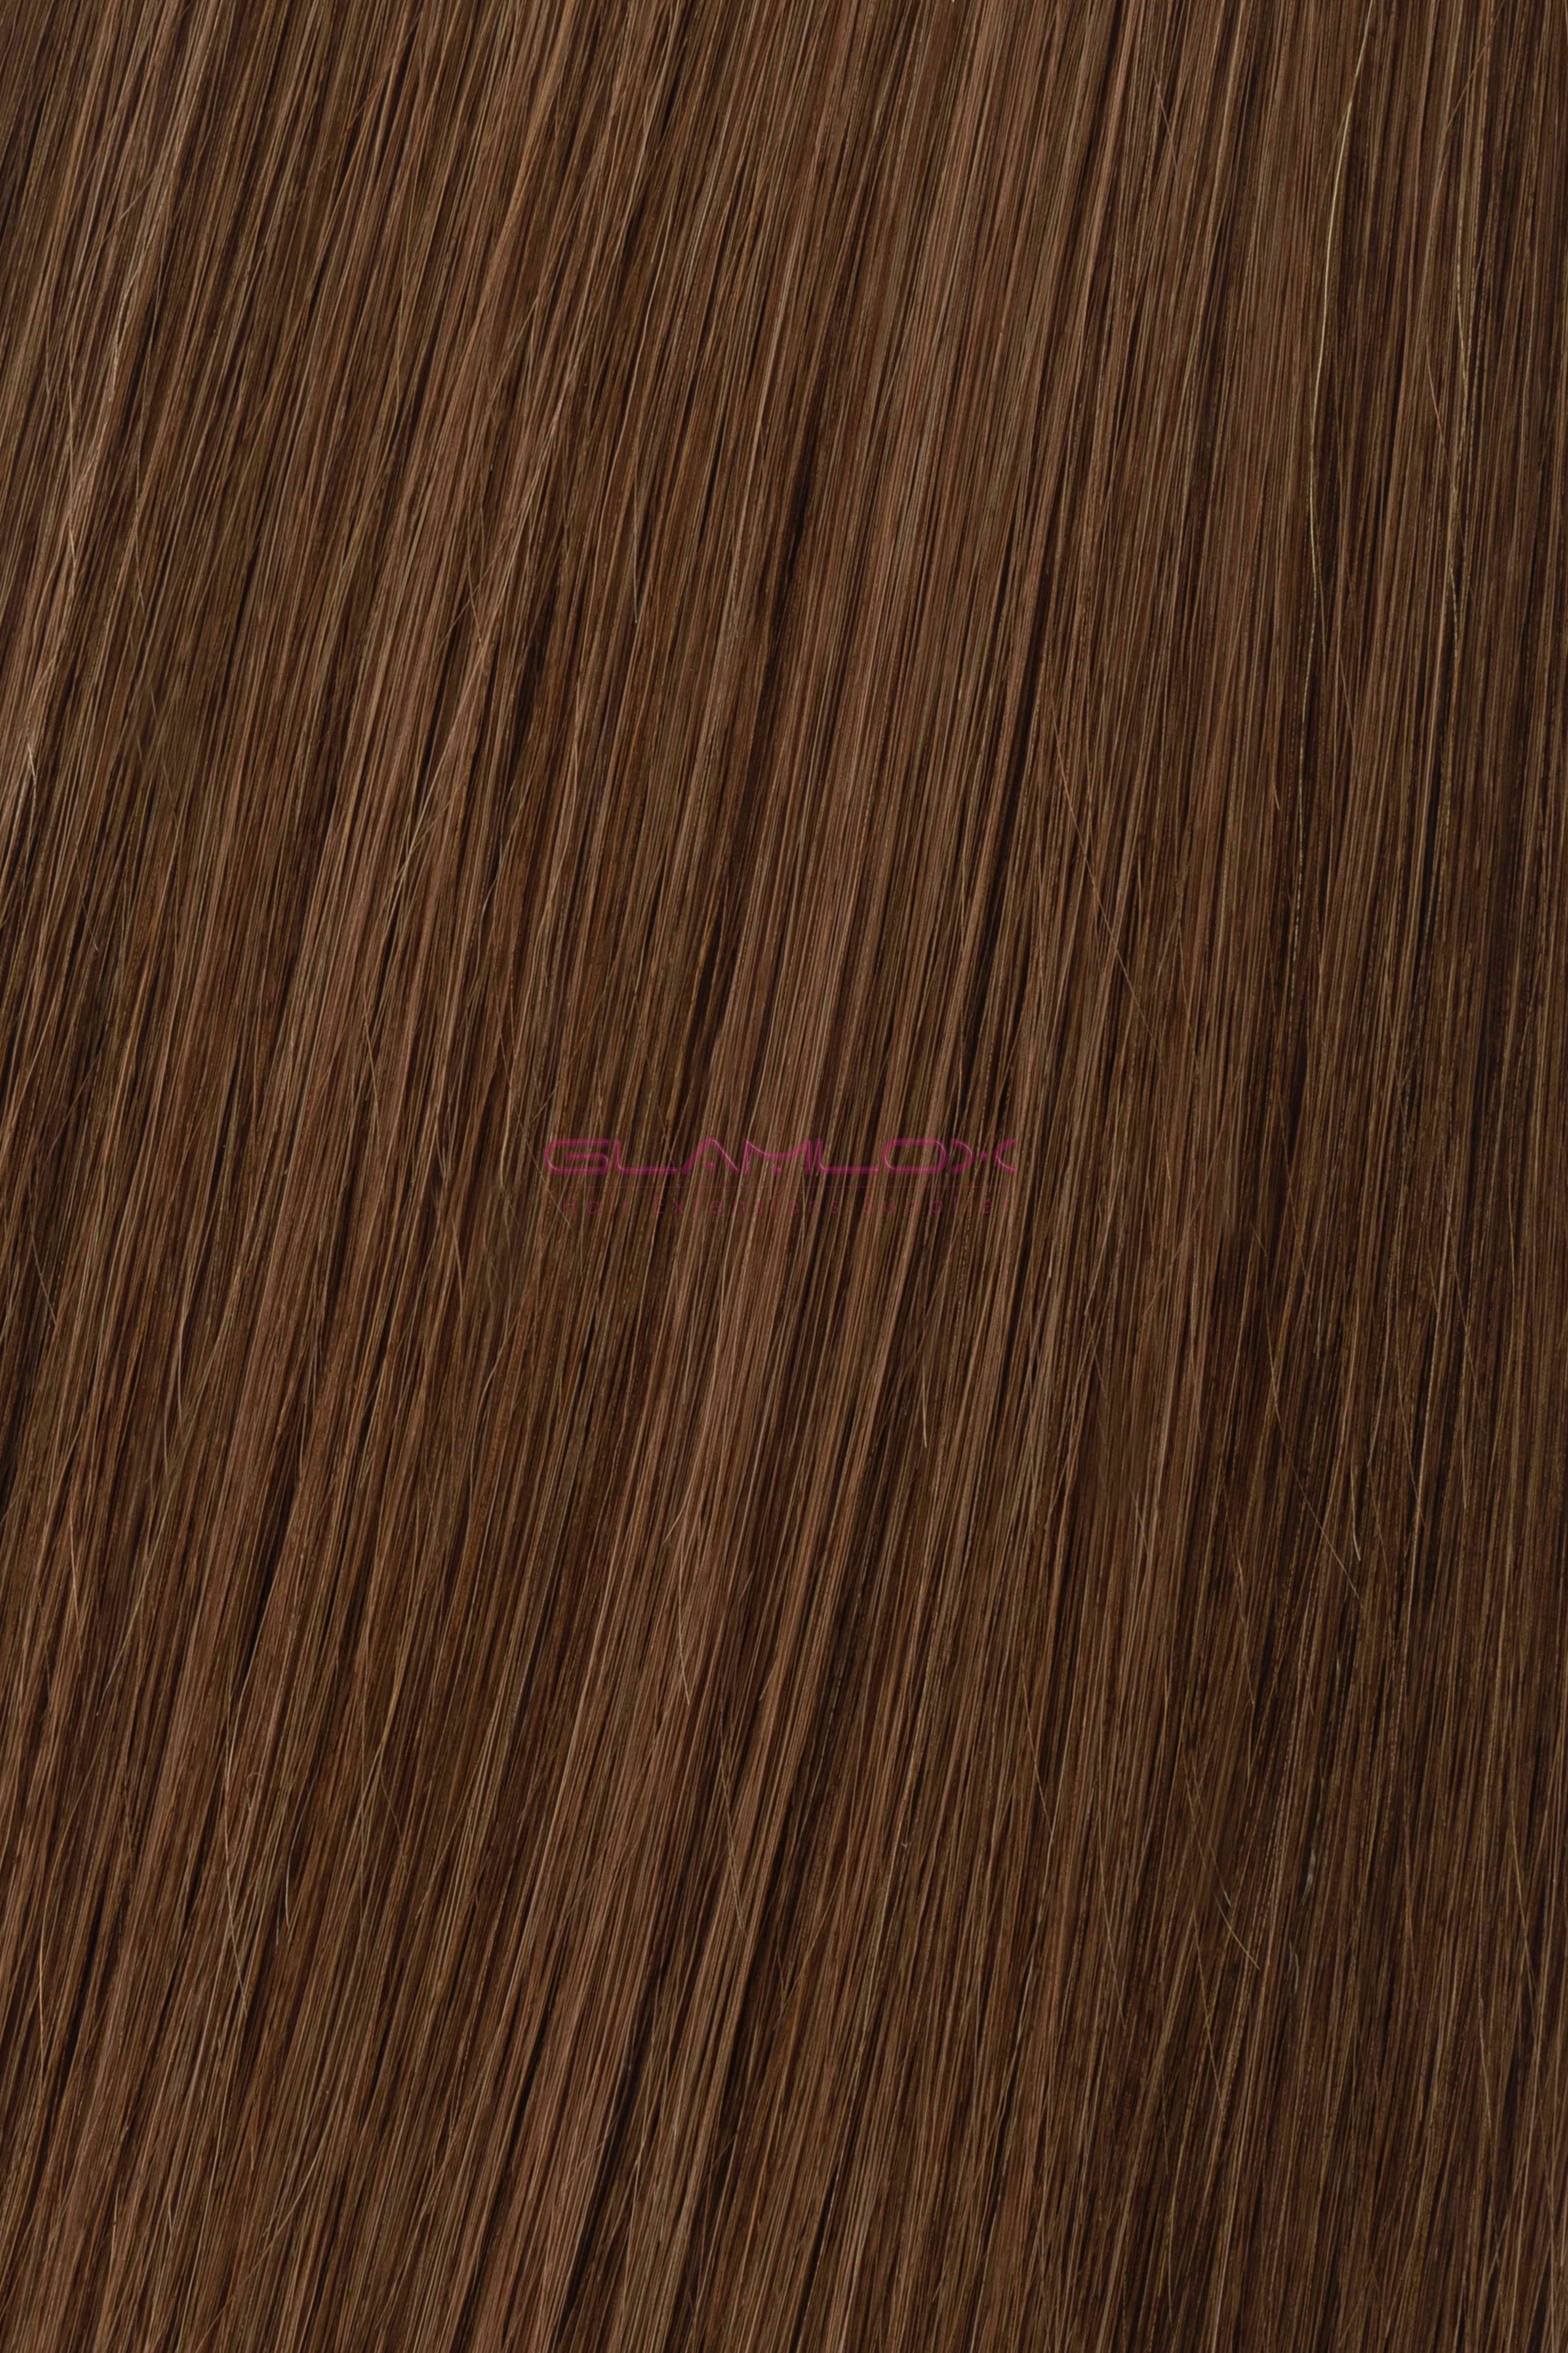 24" - 26" Full Weft Hair Extensions - Russian Mongolian Double Drawn Remy Human Hair